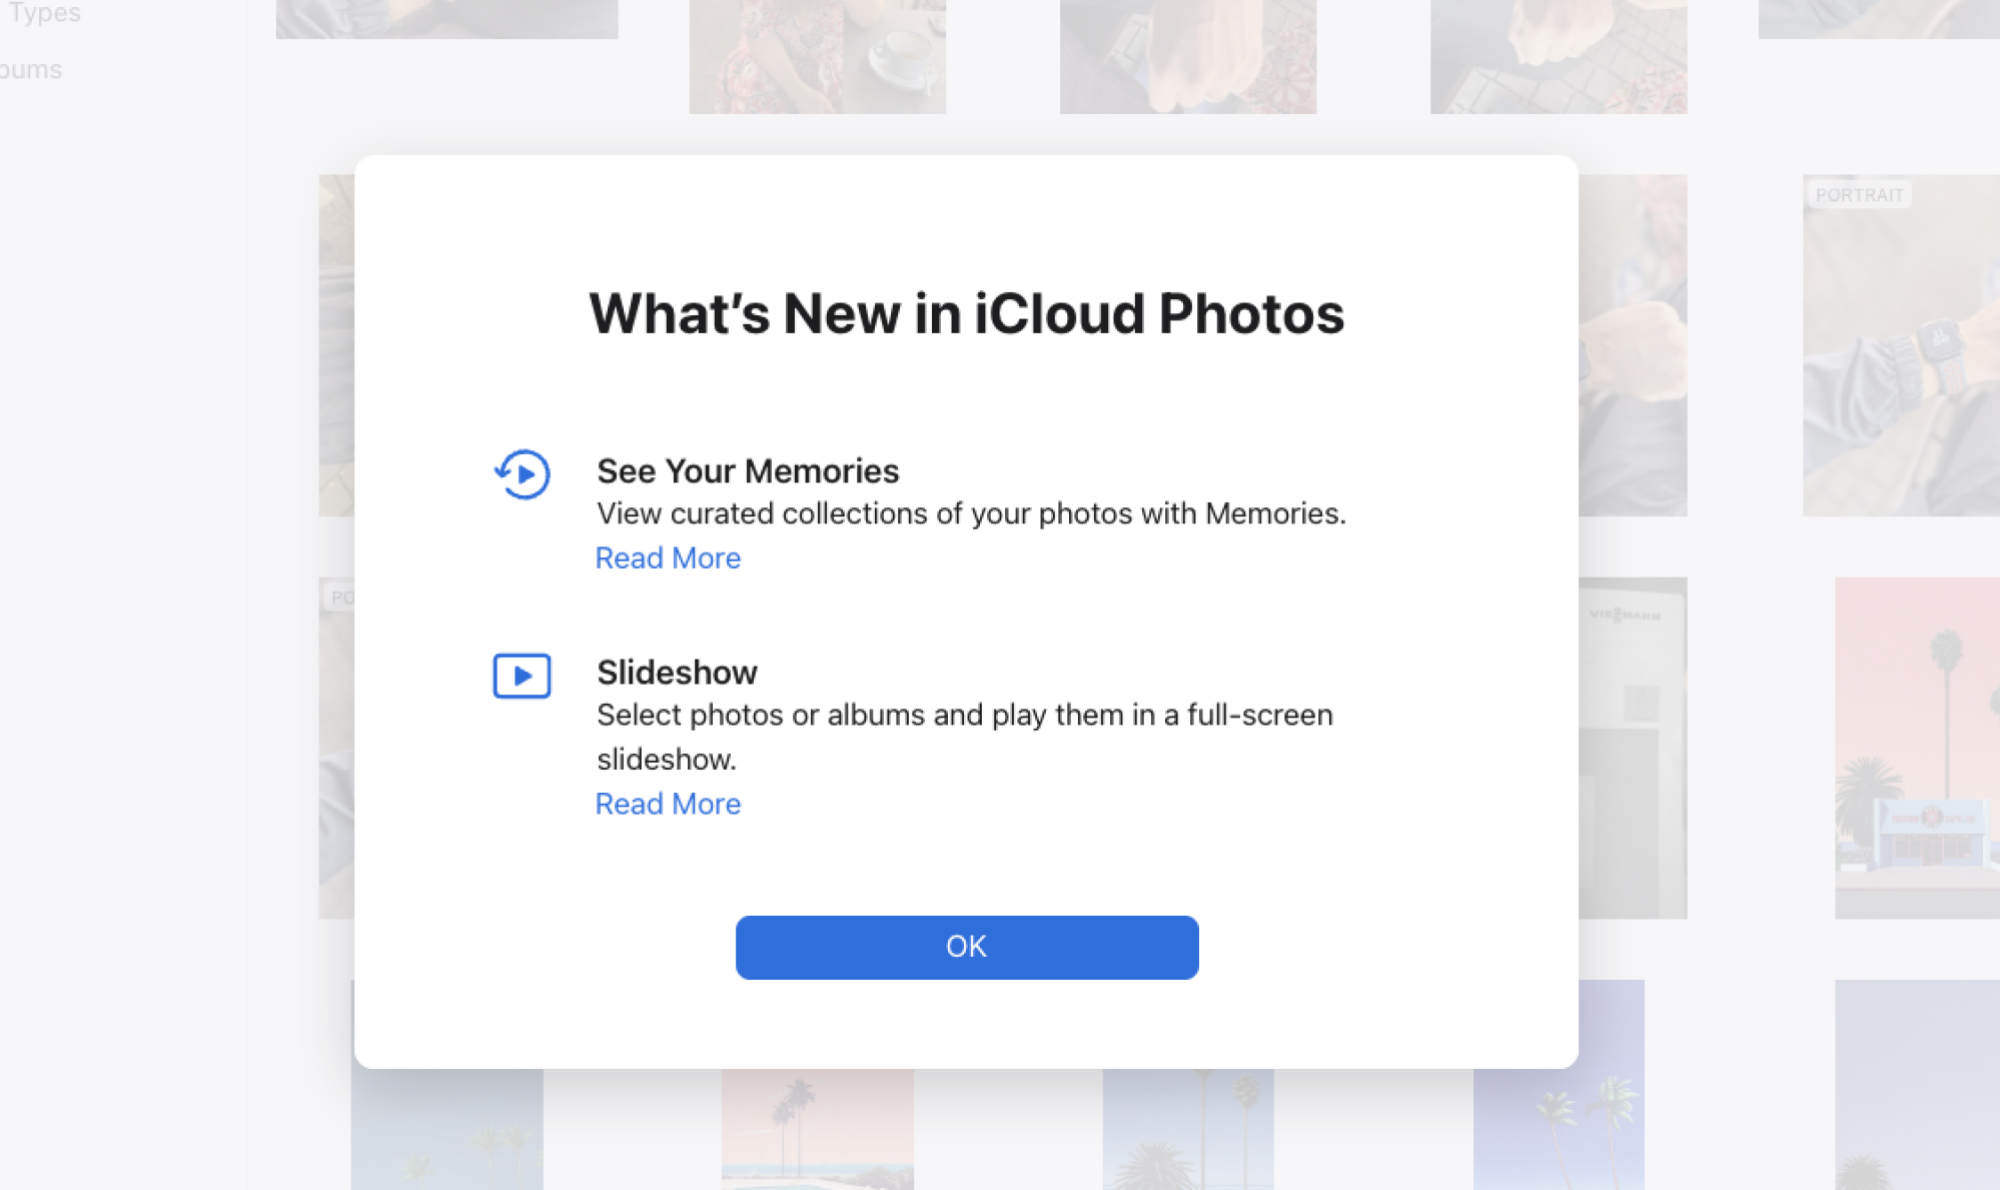 Apple’s iCloud.com becomes more customizable with updates to Photos, Mail, and more